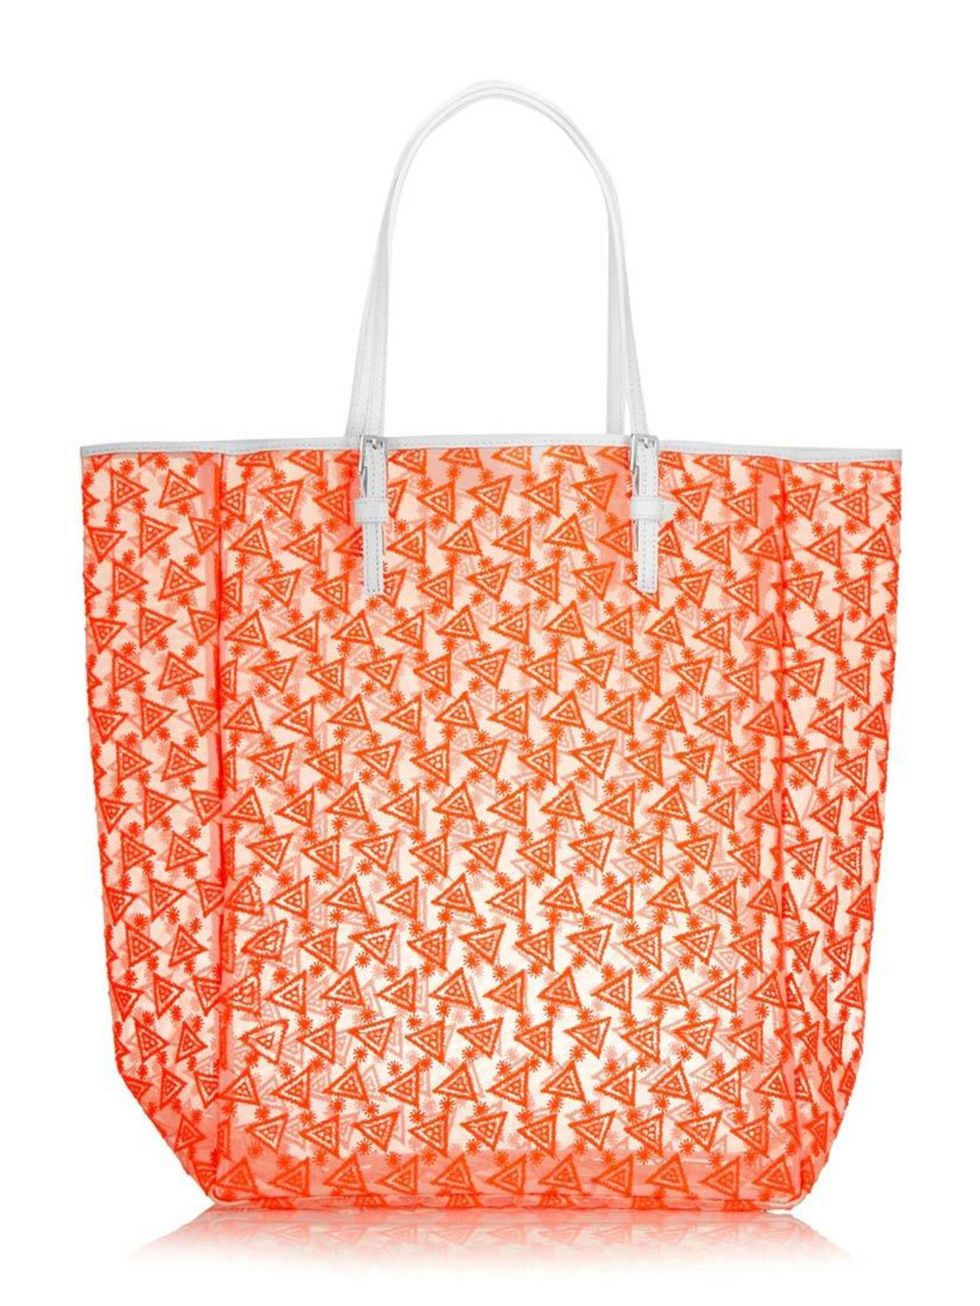 <p>Brand new and brilliant emerging brands are now at your fingertips, thanks to Net-A-Porter's new edit, Finds. </p>

<p>Duyan Bags tote, £205 by <a href="http://www.net-a-porter.com/gb/en/product/515334" target="_blank">Finds at Net-A-Porter</a></p>